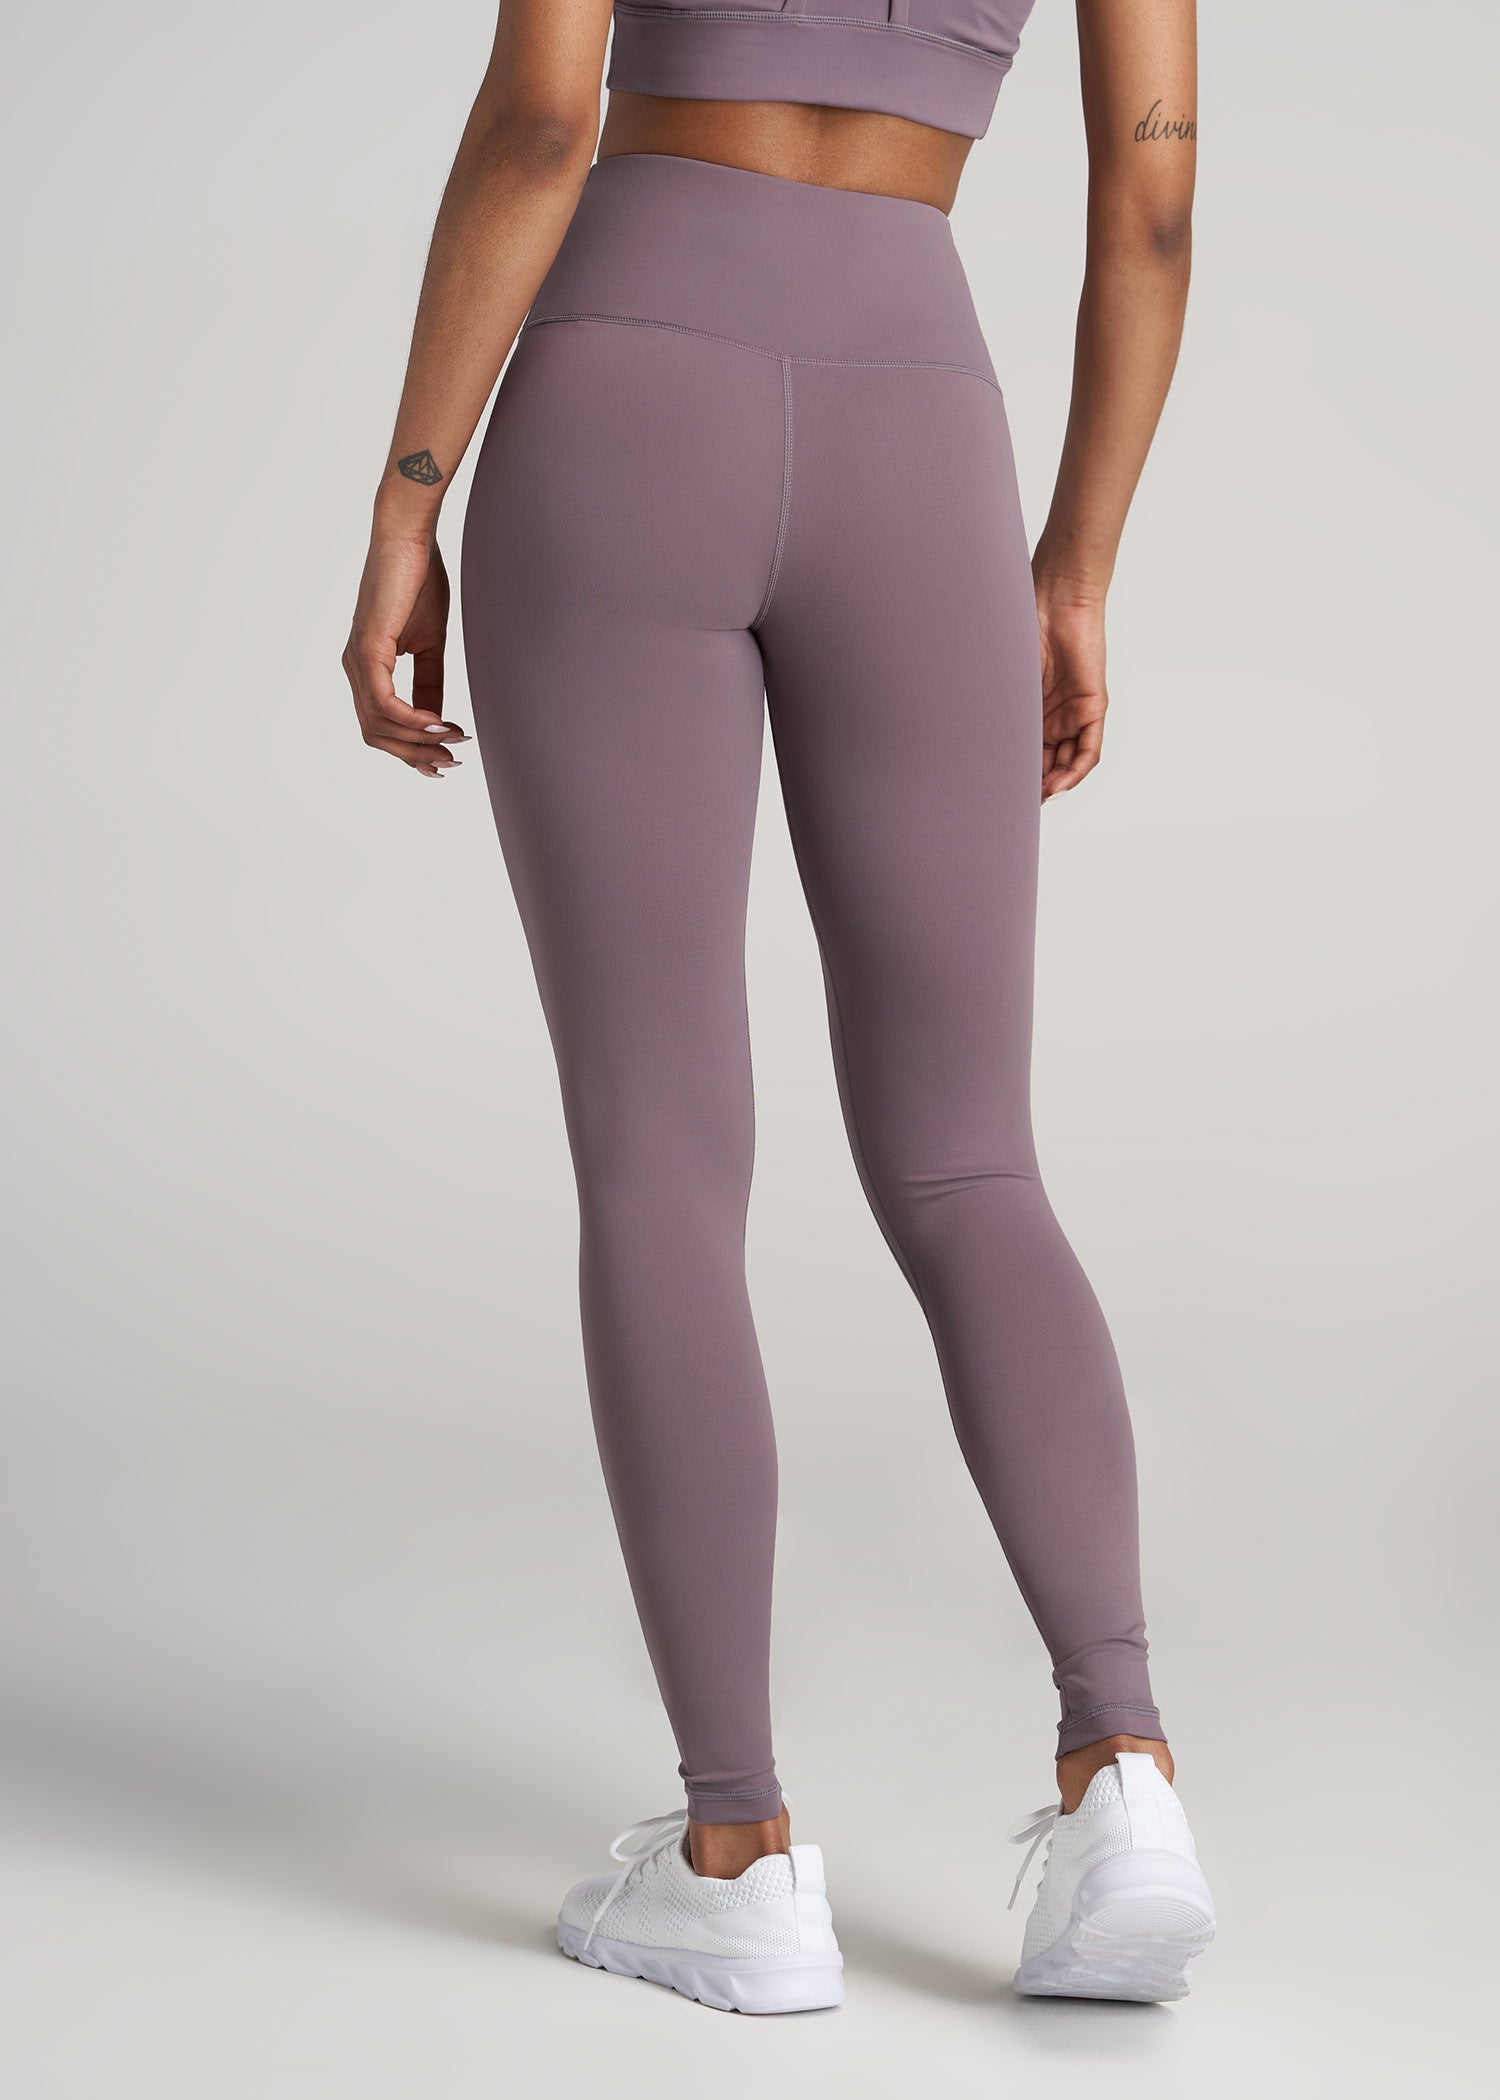 AT Balance High-Rise Leggings For Tall Women American Tall, 55% OFF